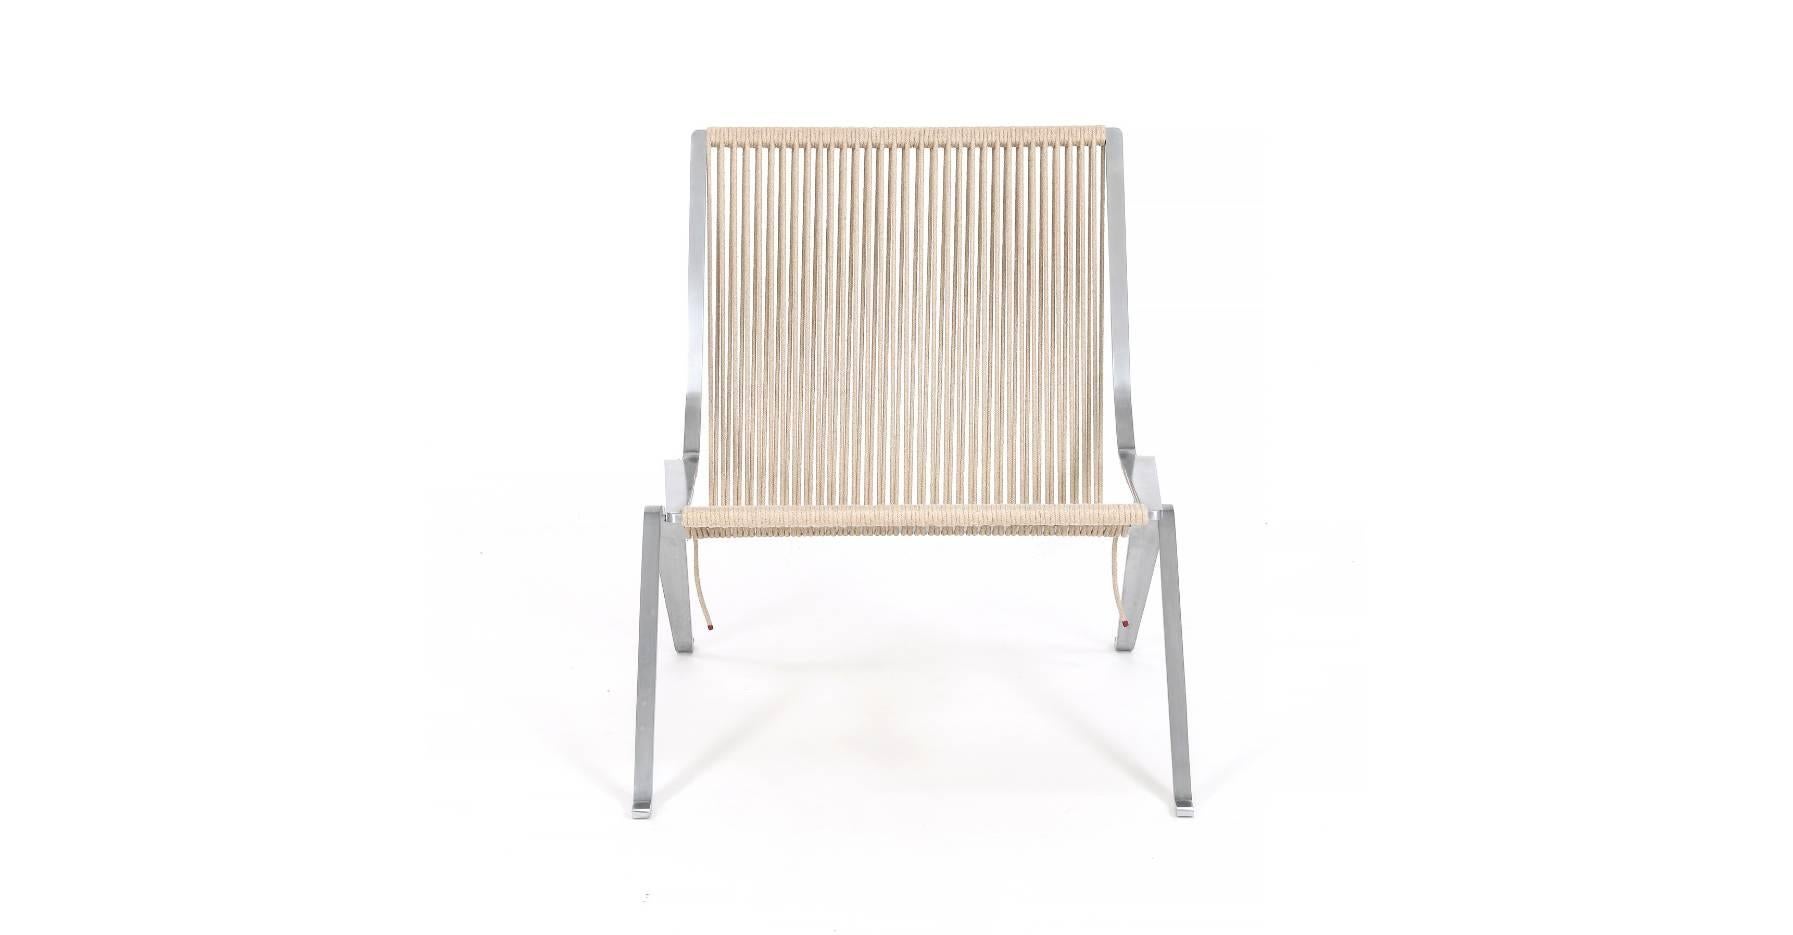 “PK 25”. Lounge chair with stainless steel frame. Seat and back mounted with flag halyard. Designed 1951. This example manufactured 2007 by Fritz Hansen, with maker's label.

Certificate included. Stamped serial number: 10070000995.

Good